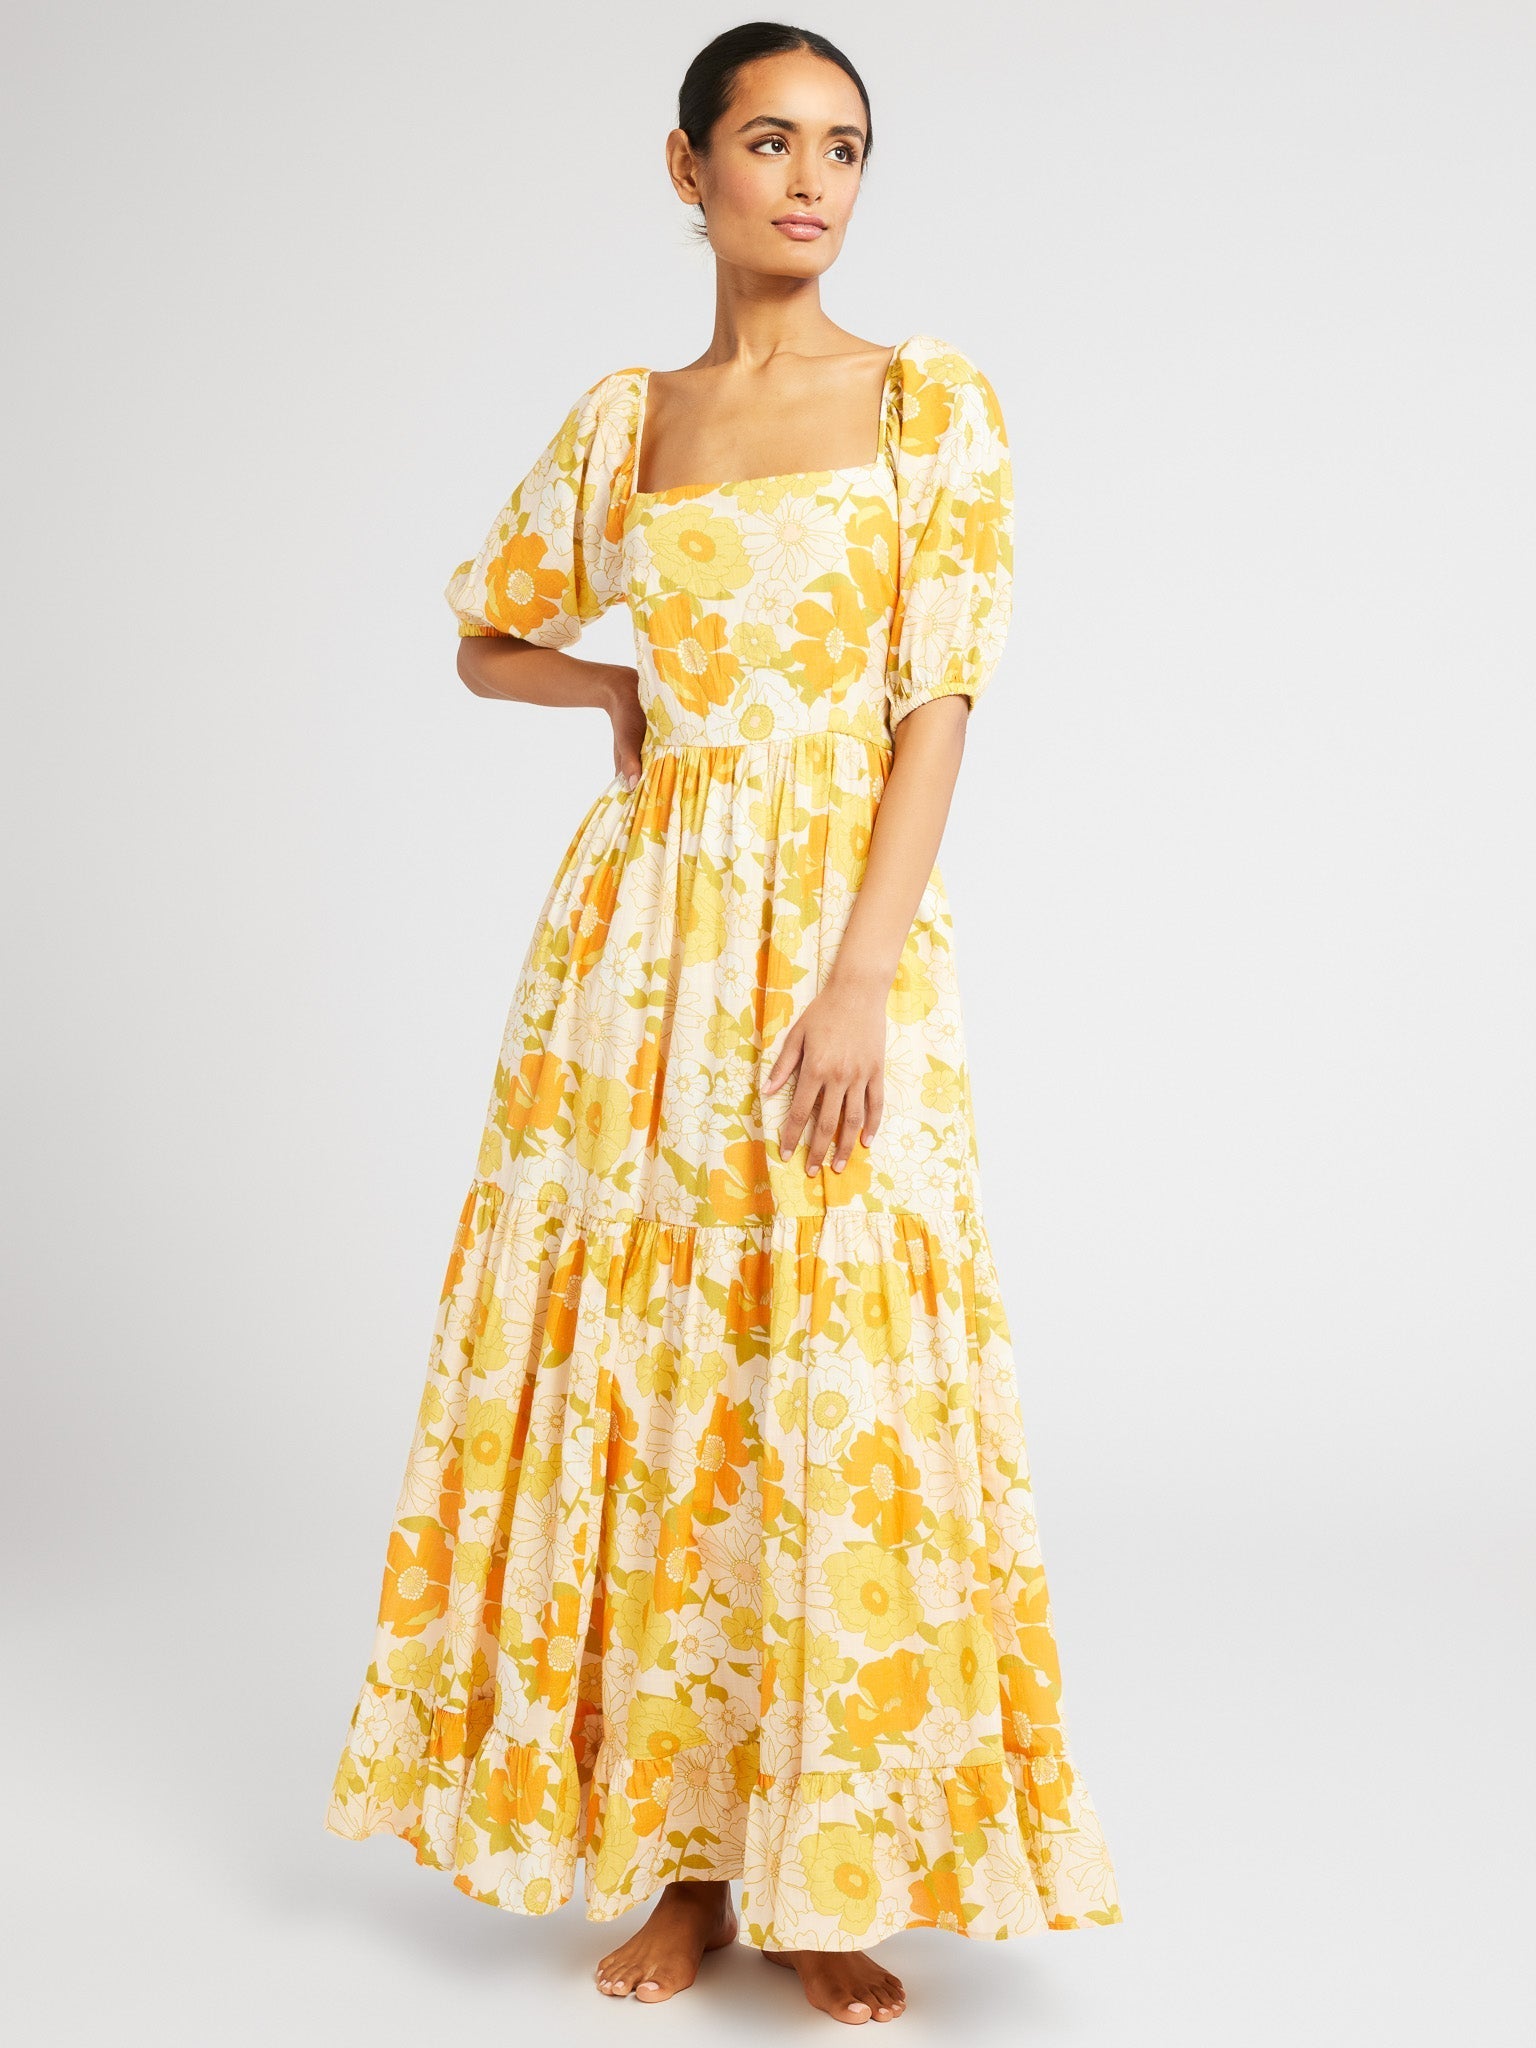 MILLE Clothing Manon Dress in Retro Floral